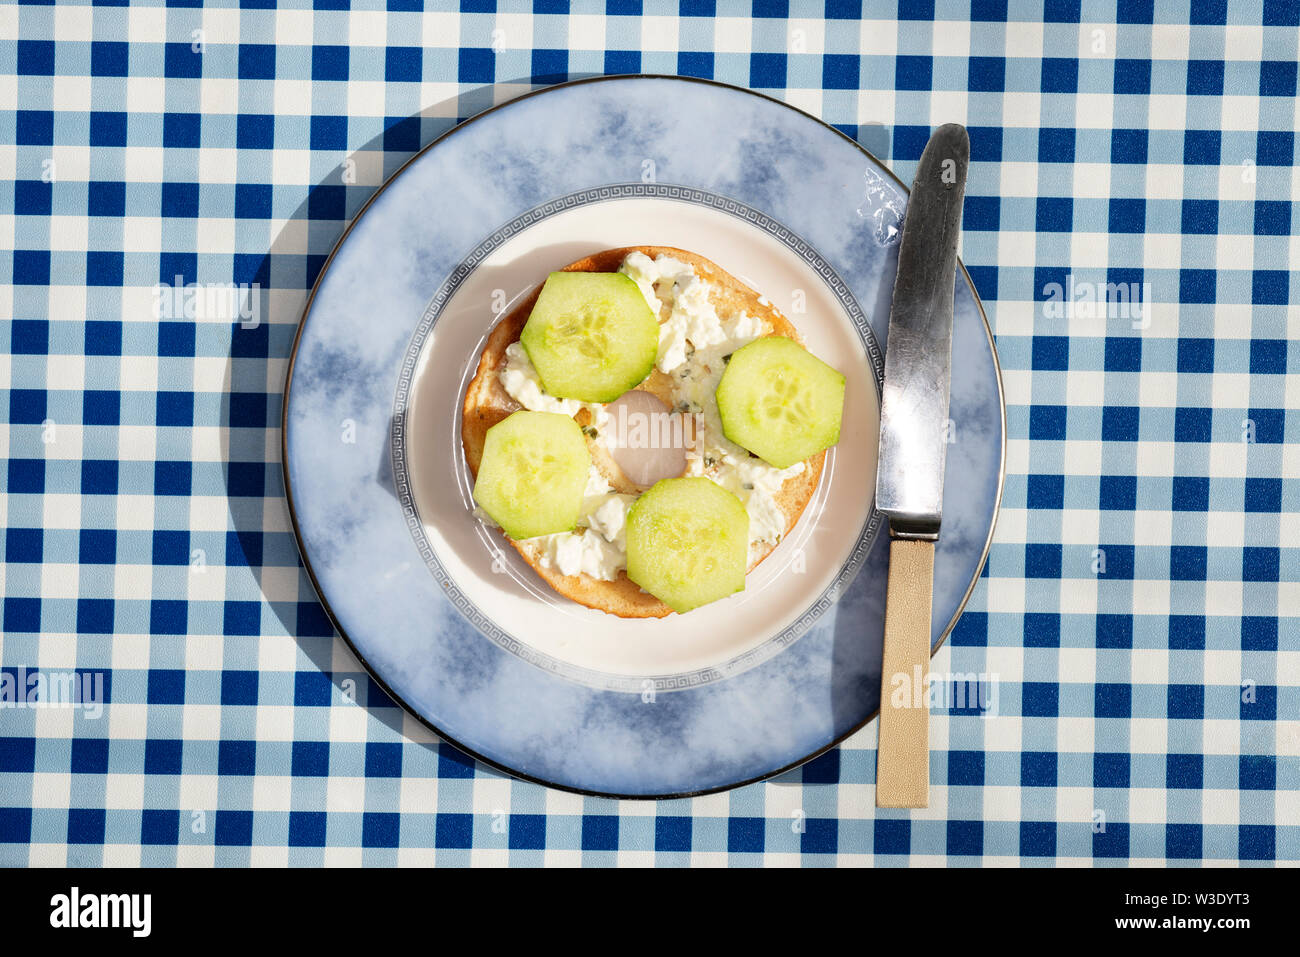 Cottage cheese and sliced cucumber on toasted bagel Stock Photo